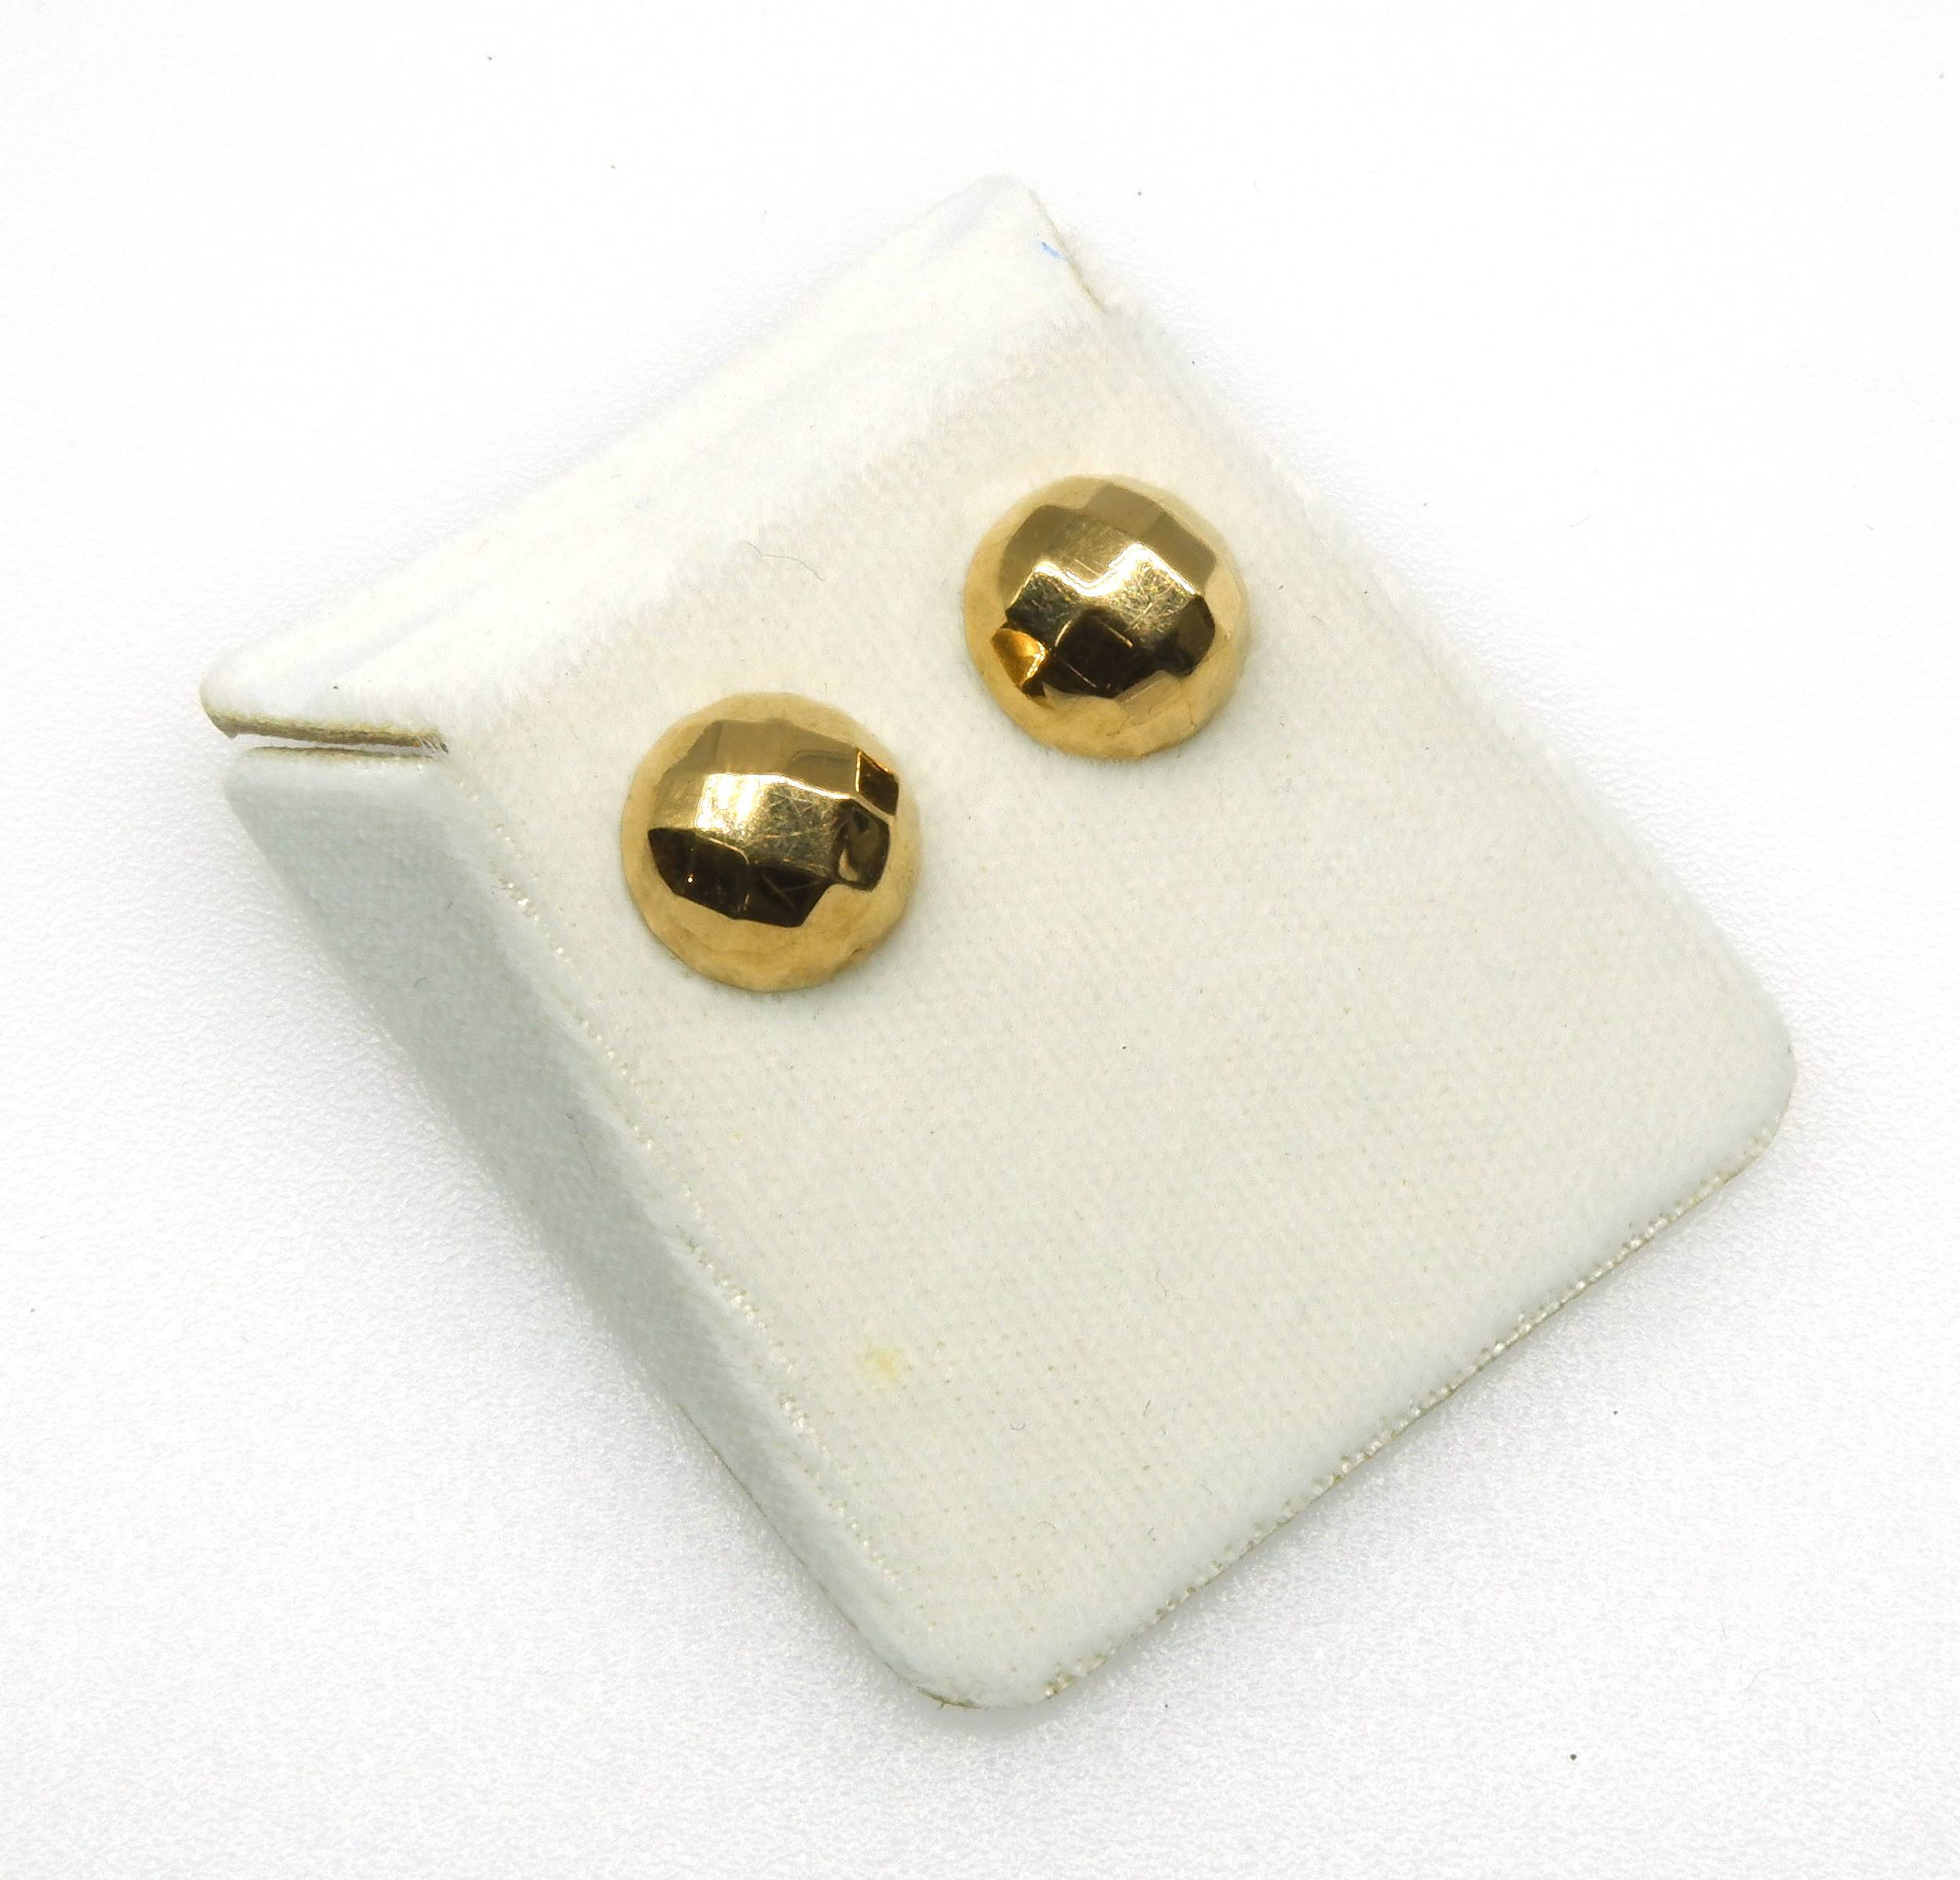 '9ct Yellow Gold Half Sphere Earrings with Facetted Top Stud'